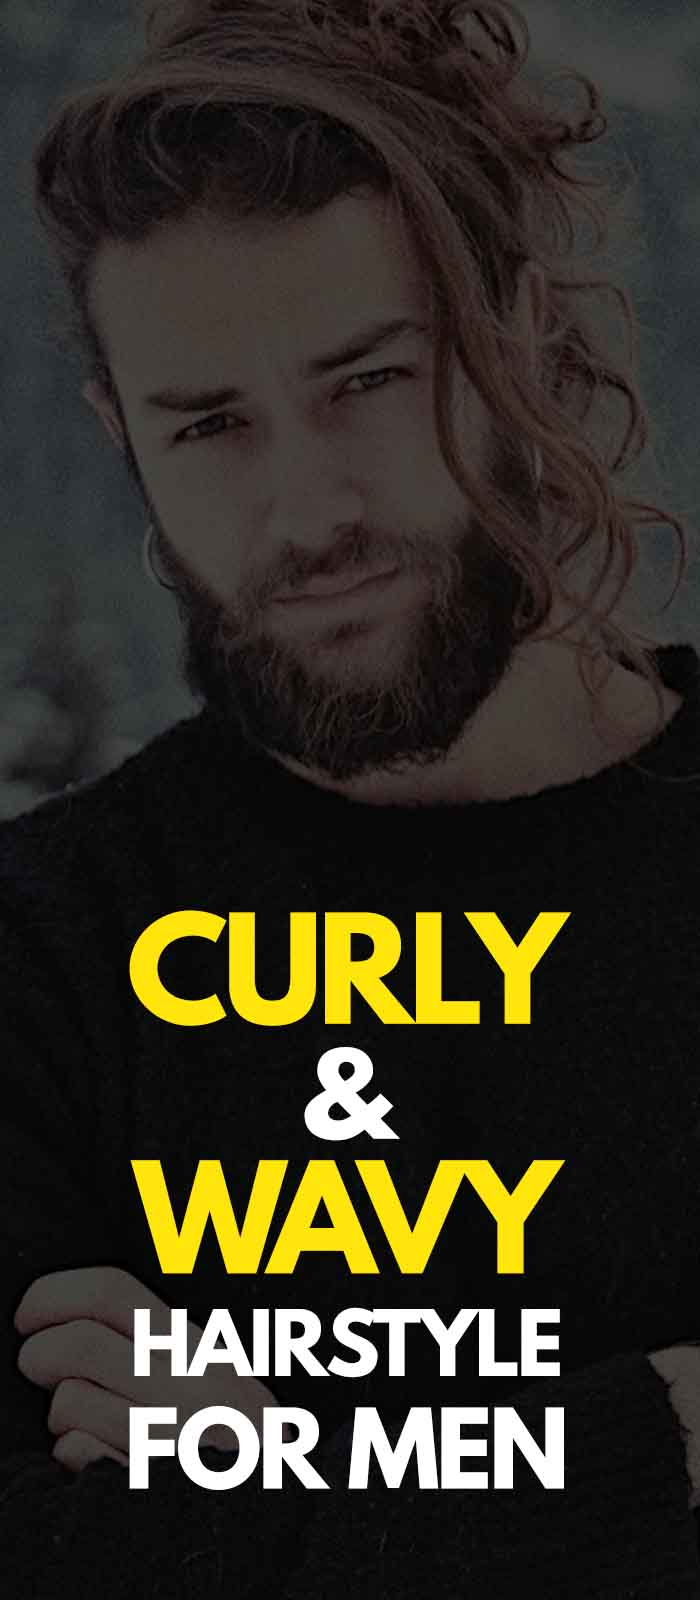 HOW TO GET STRAIGHT HAIR  Men's Curly to Straight Hair Tutorial 2019 